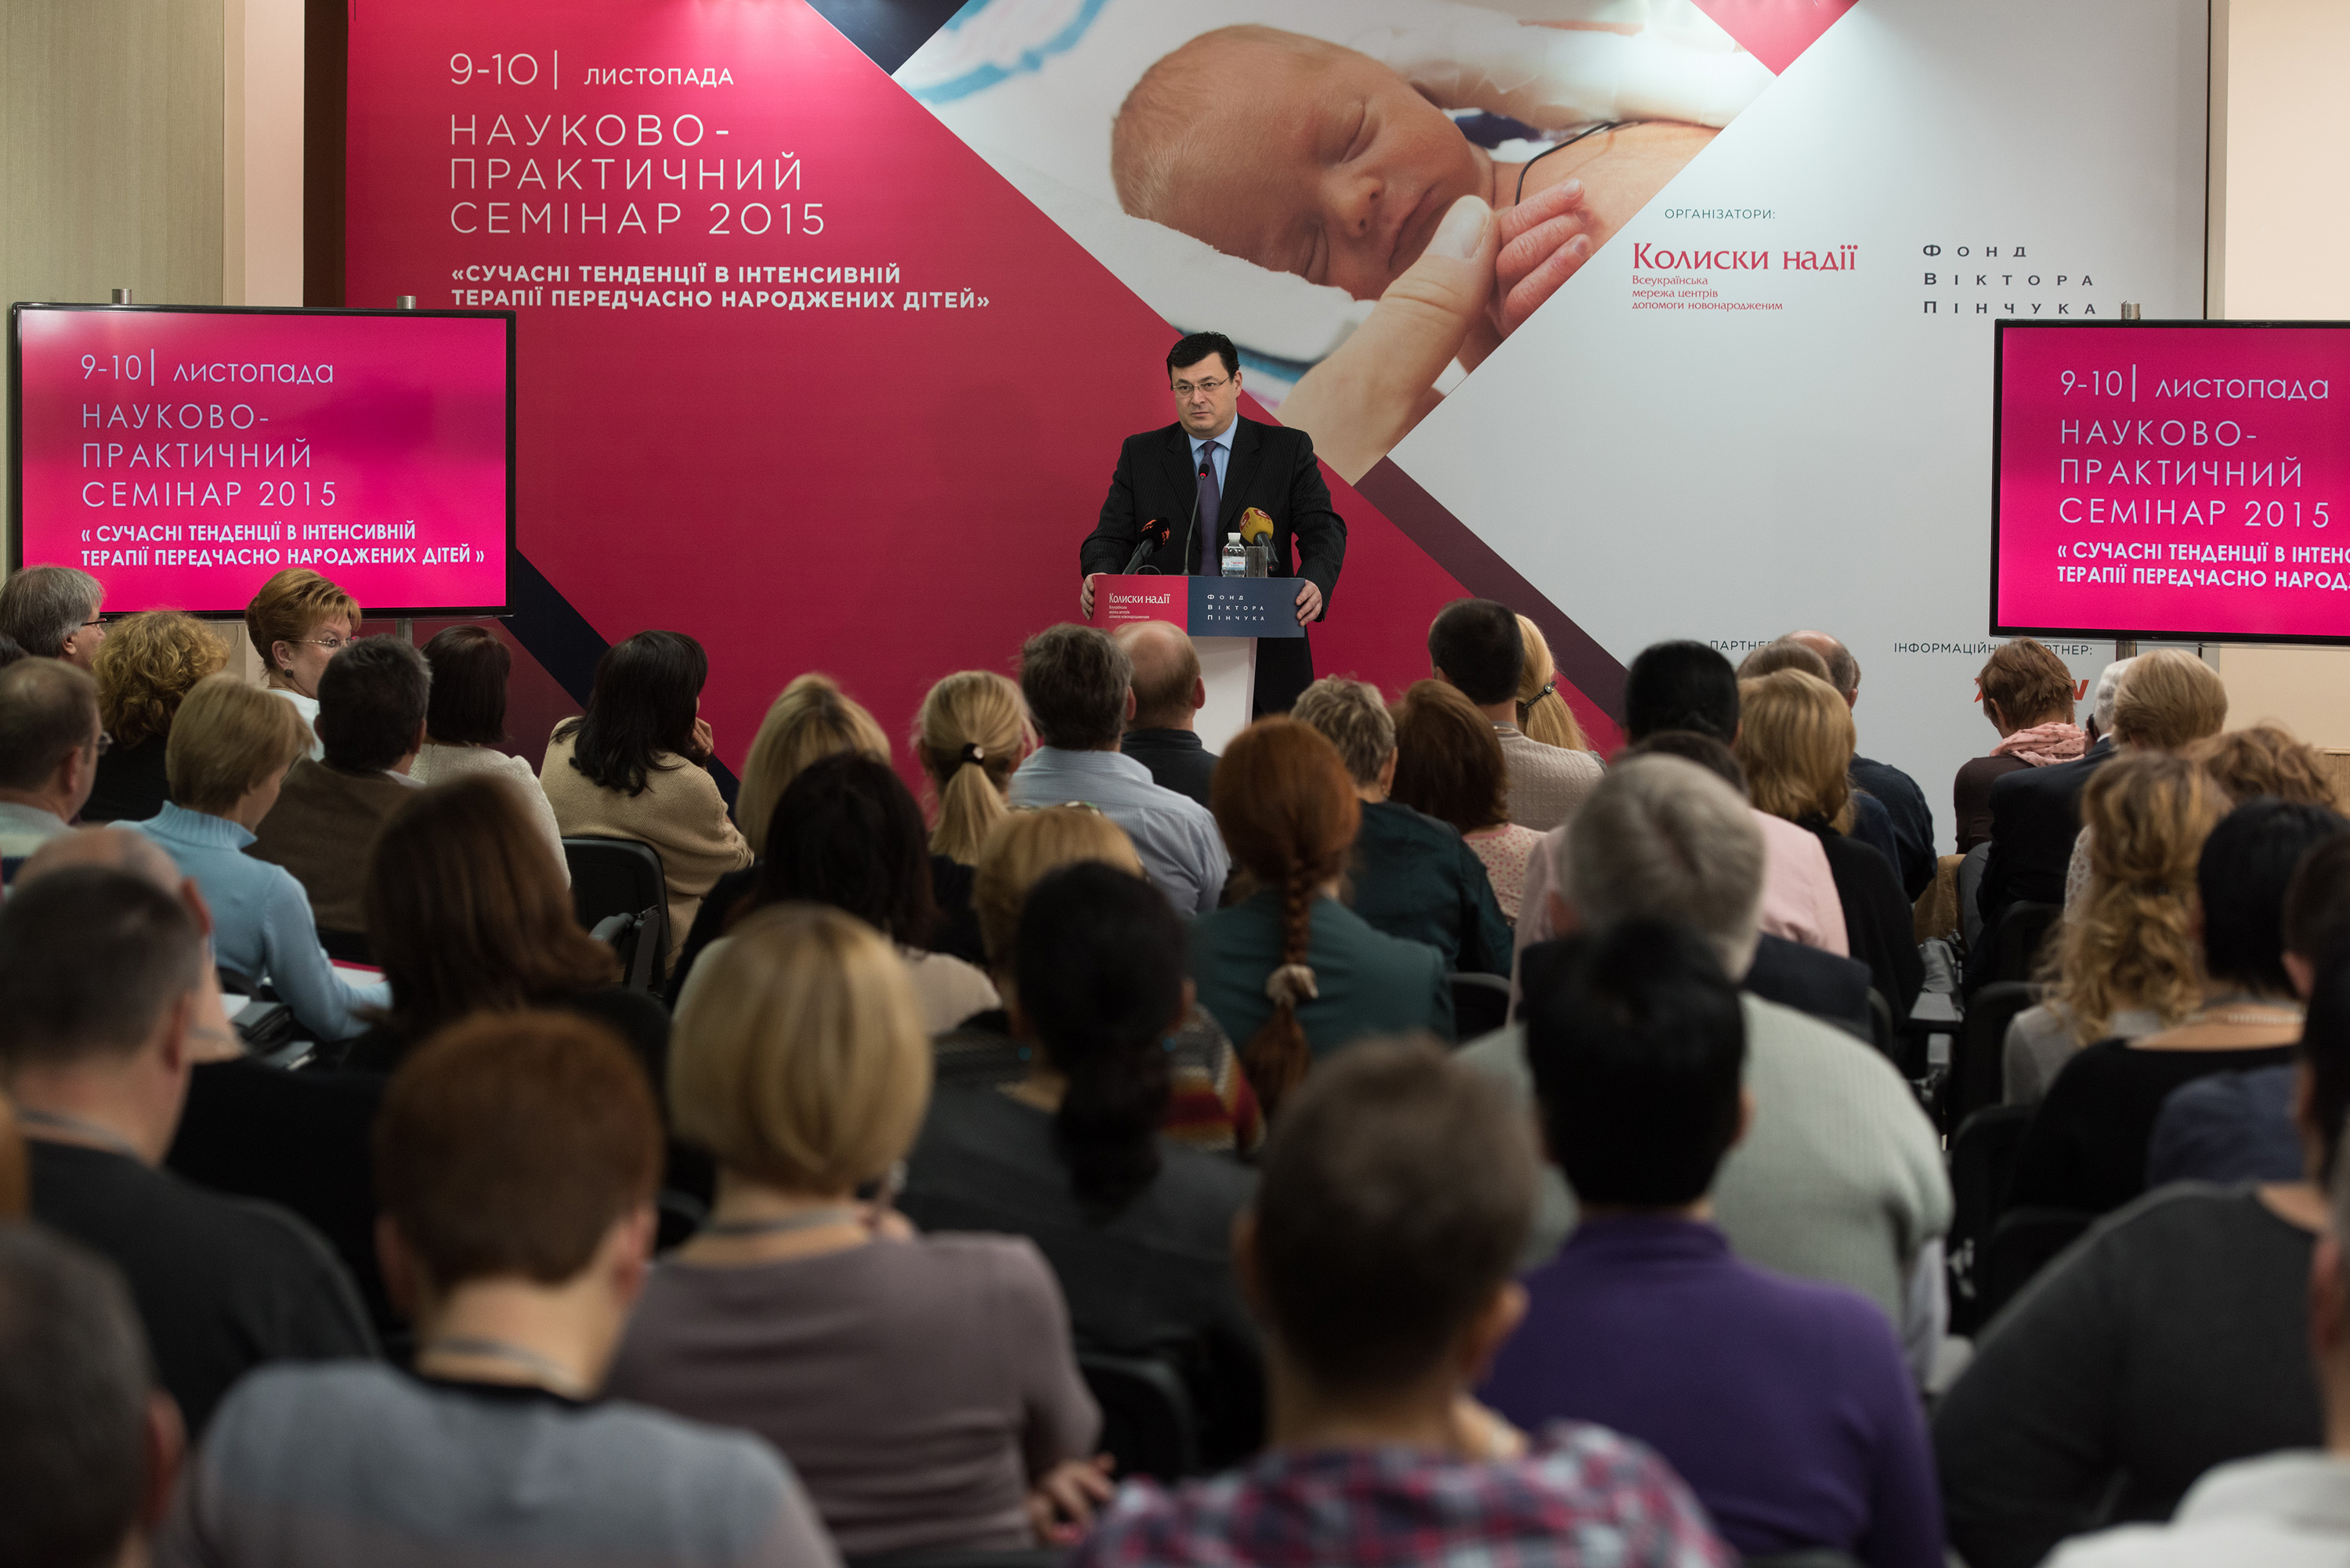 International conference for neonatologists in Kyiv, as part of the 